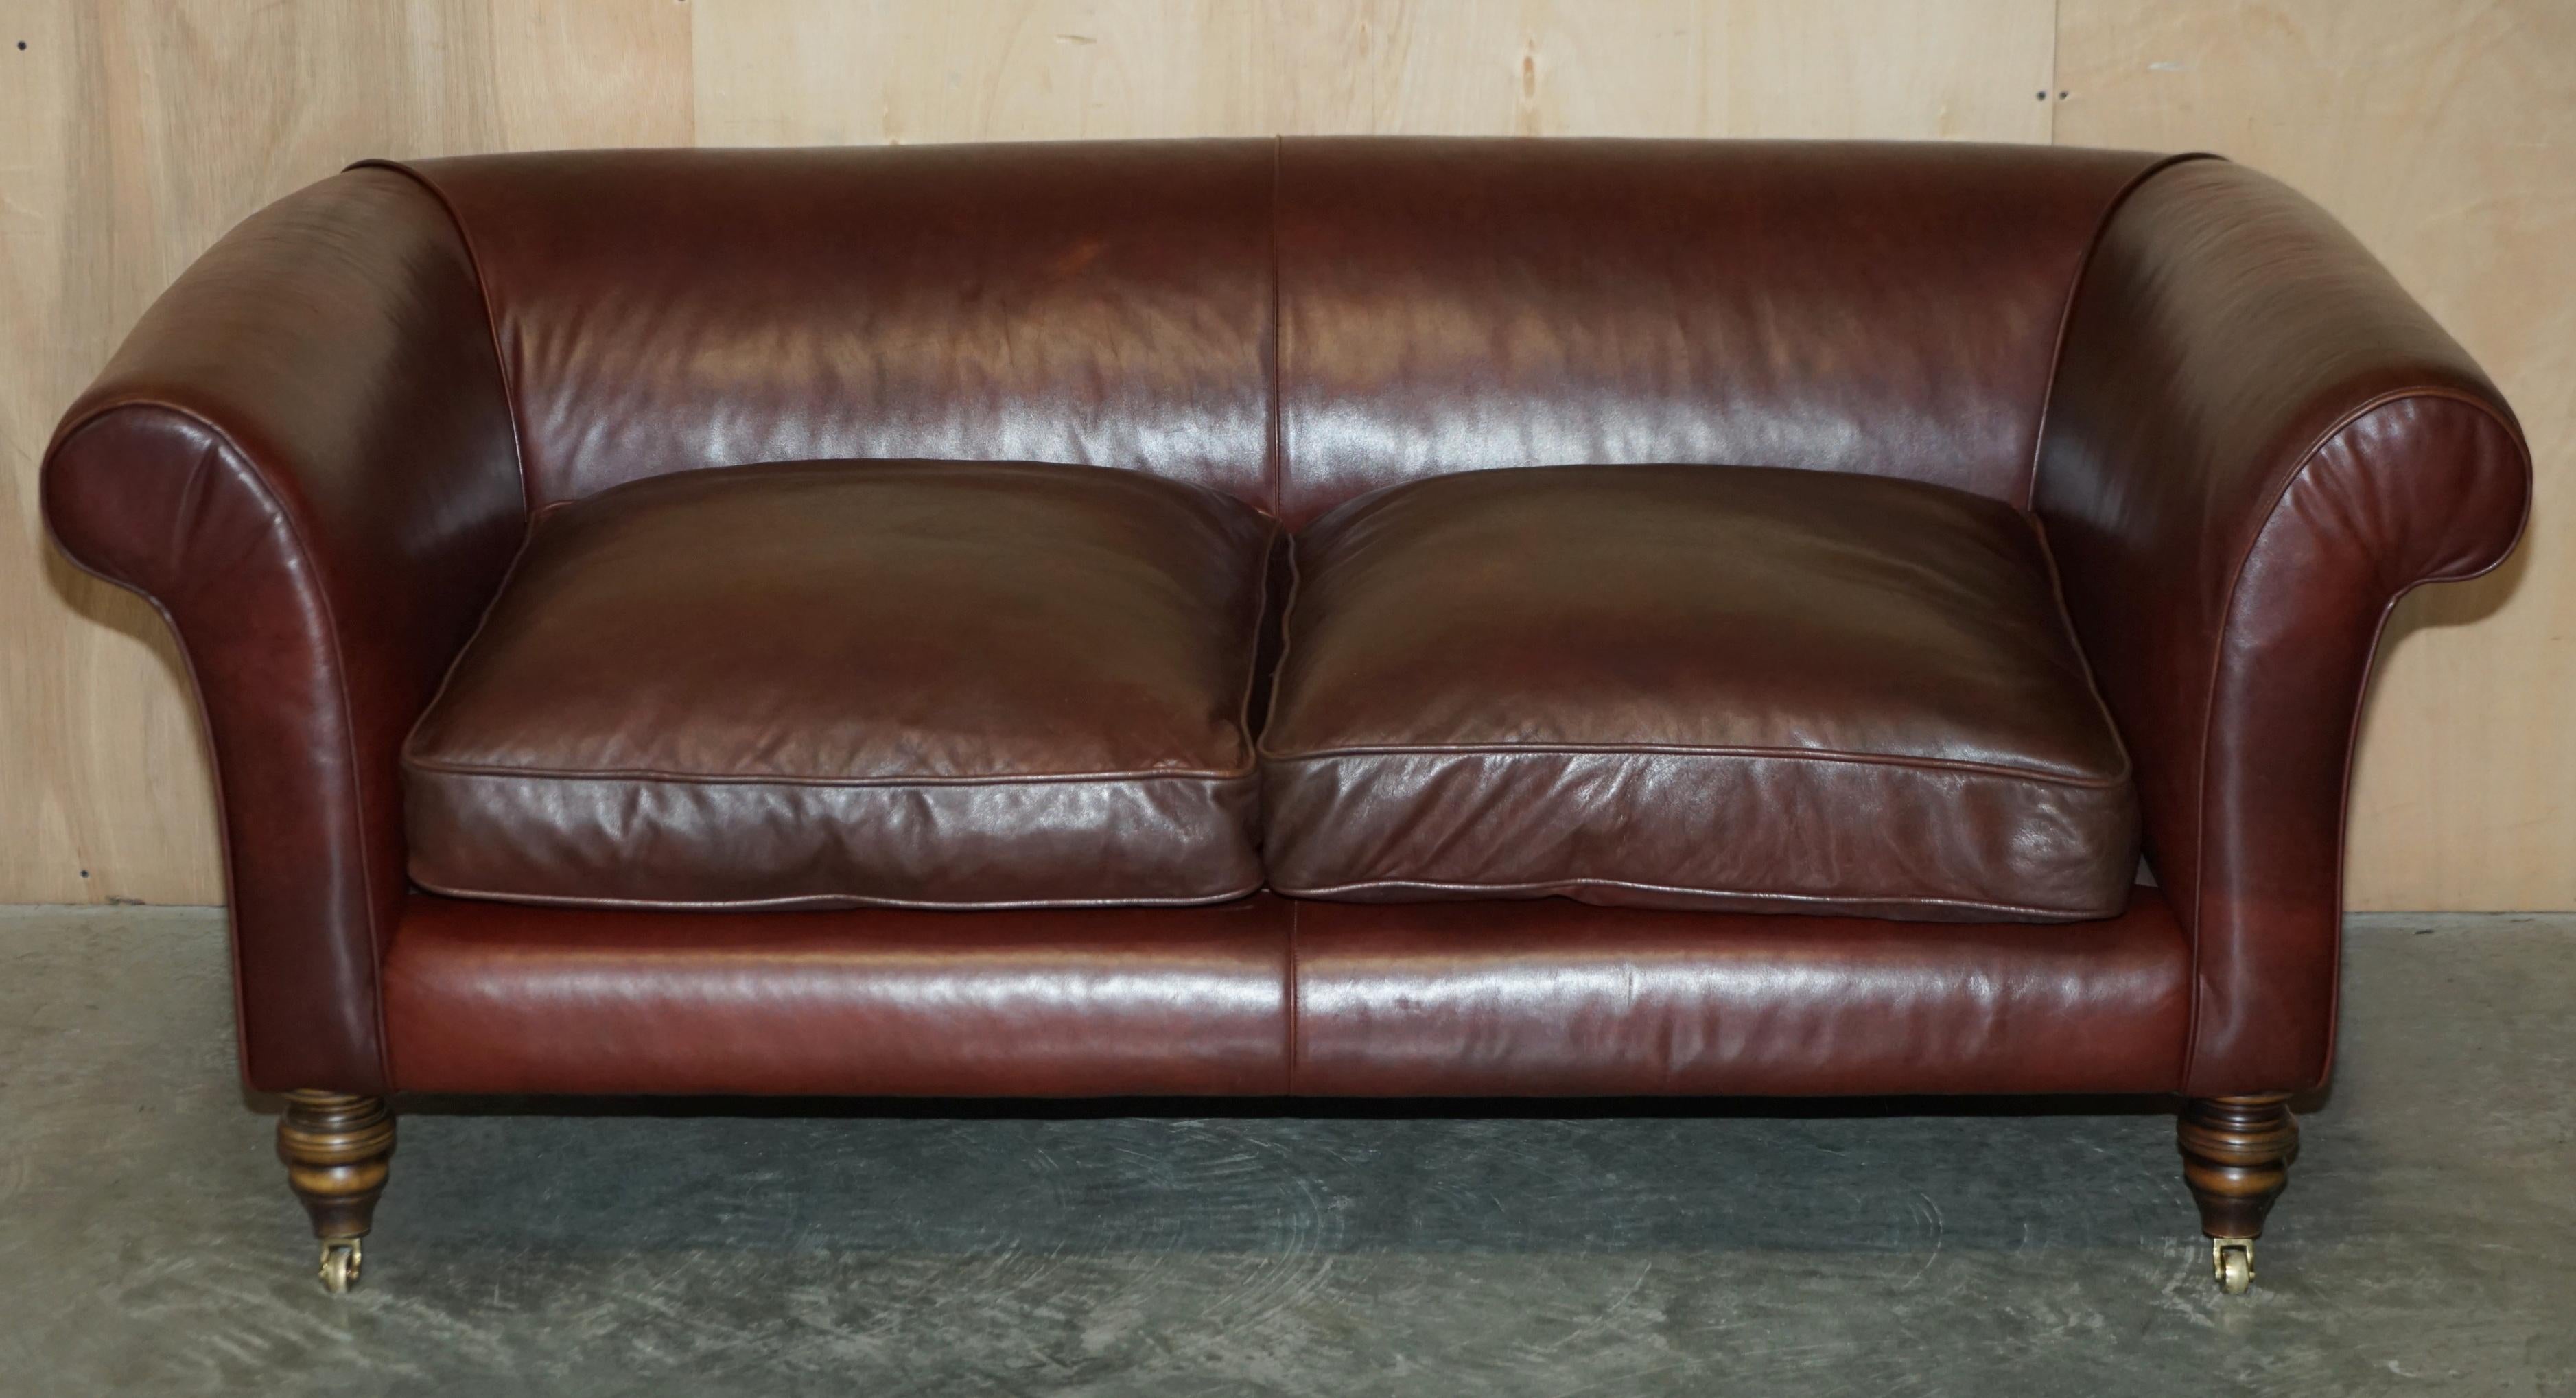 Royal House Antiques

Royal House Antiques is delighted to offer for sale this lovely vintage hand made in England Art Deco style reddish brown leather sofa with overstuffed feather filled cushions

Please note the delivery fee listed is just a